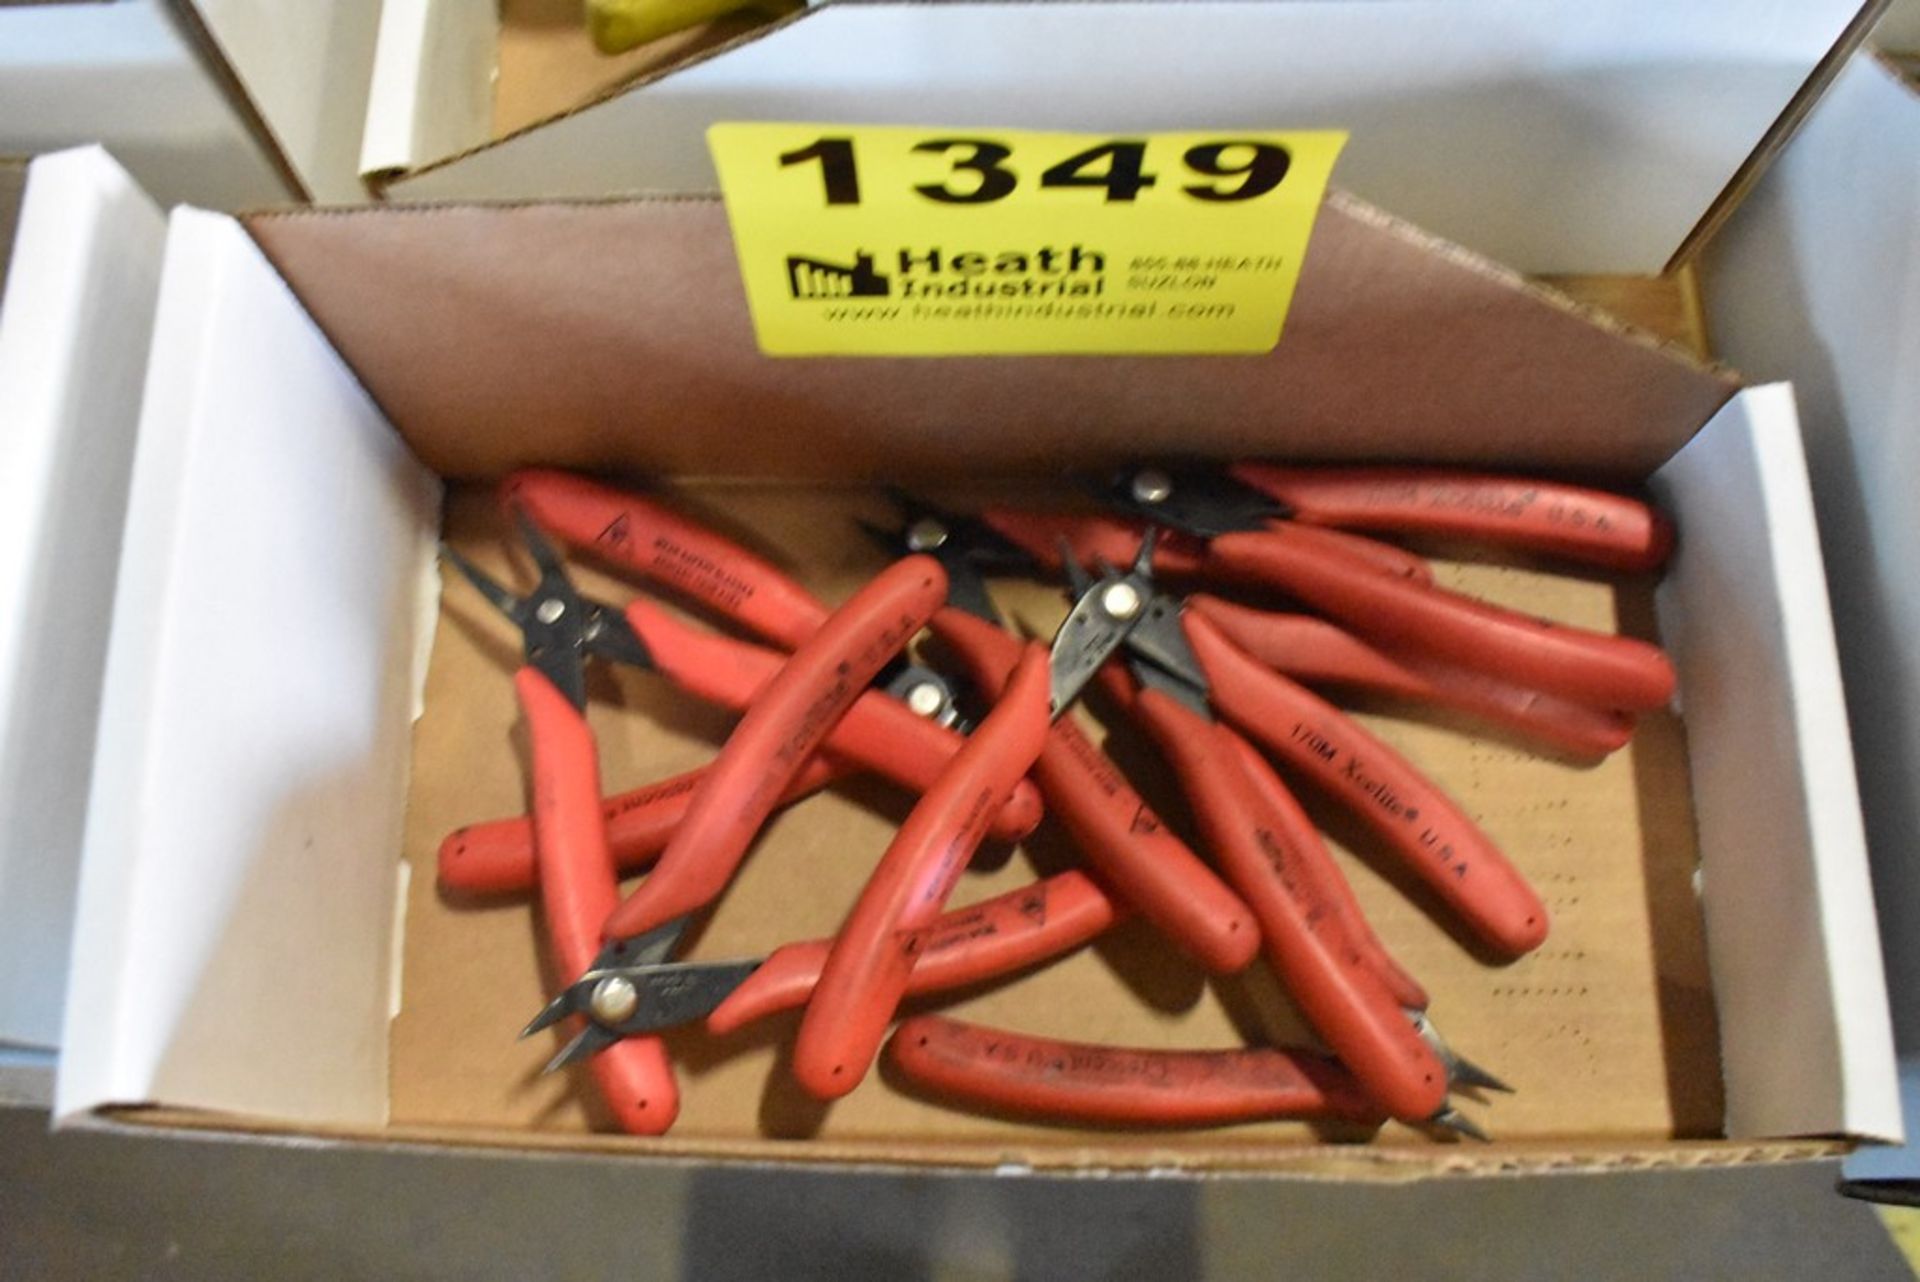 (8) EXELITE WIRE CUTTERS